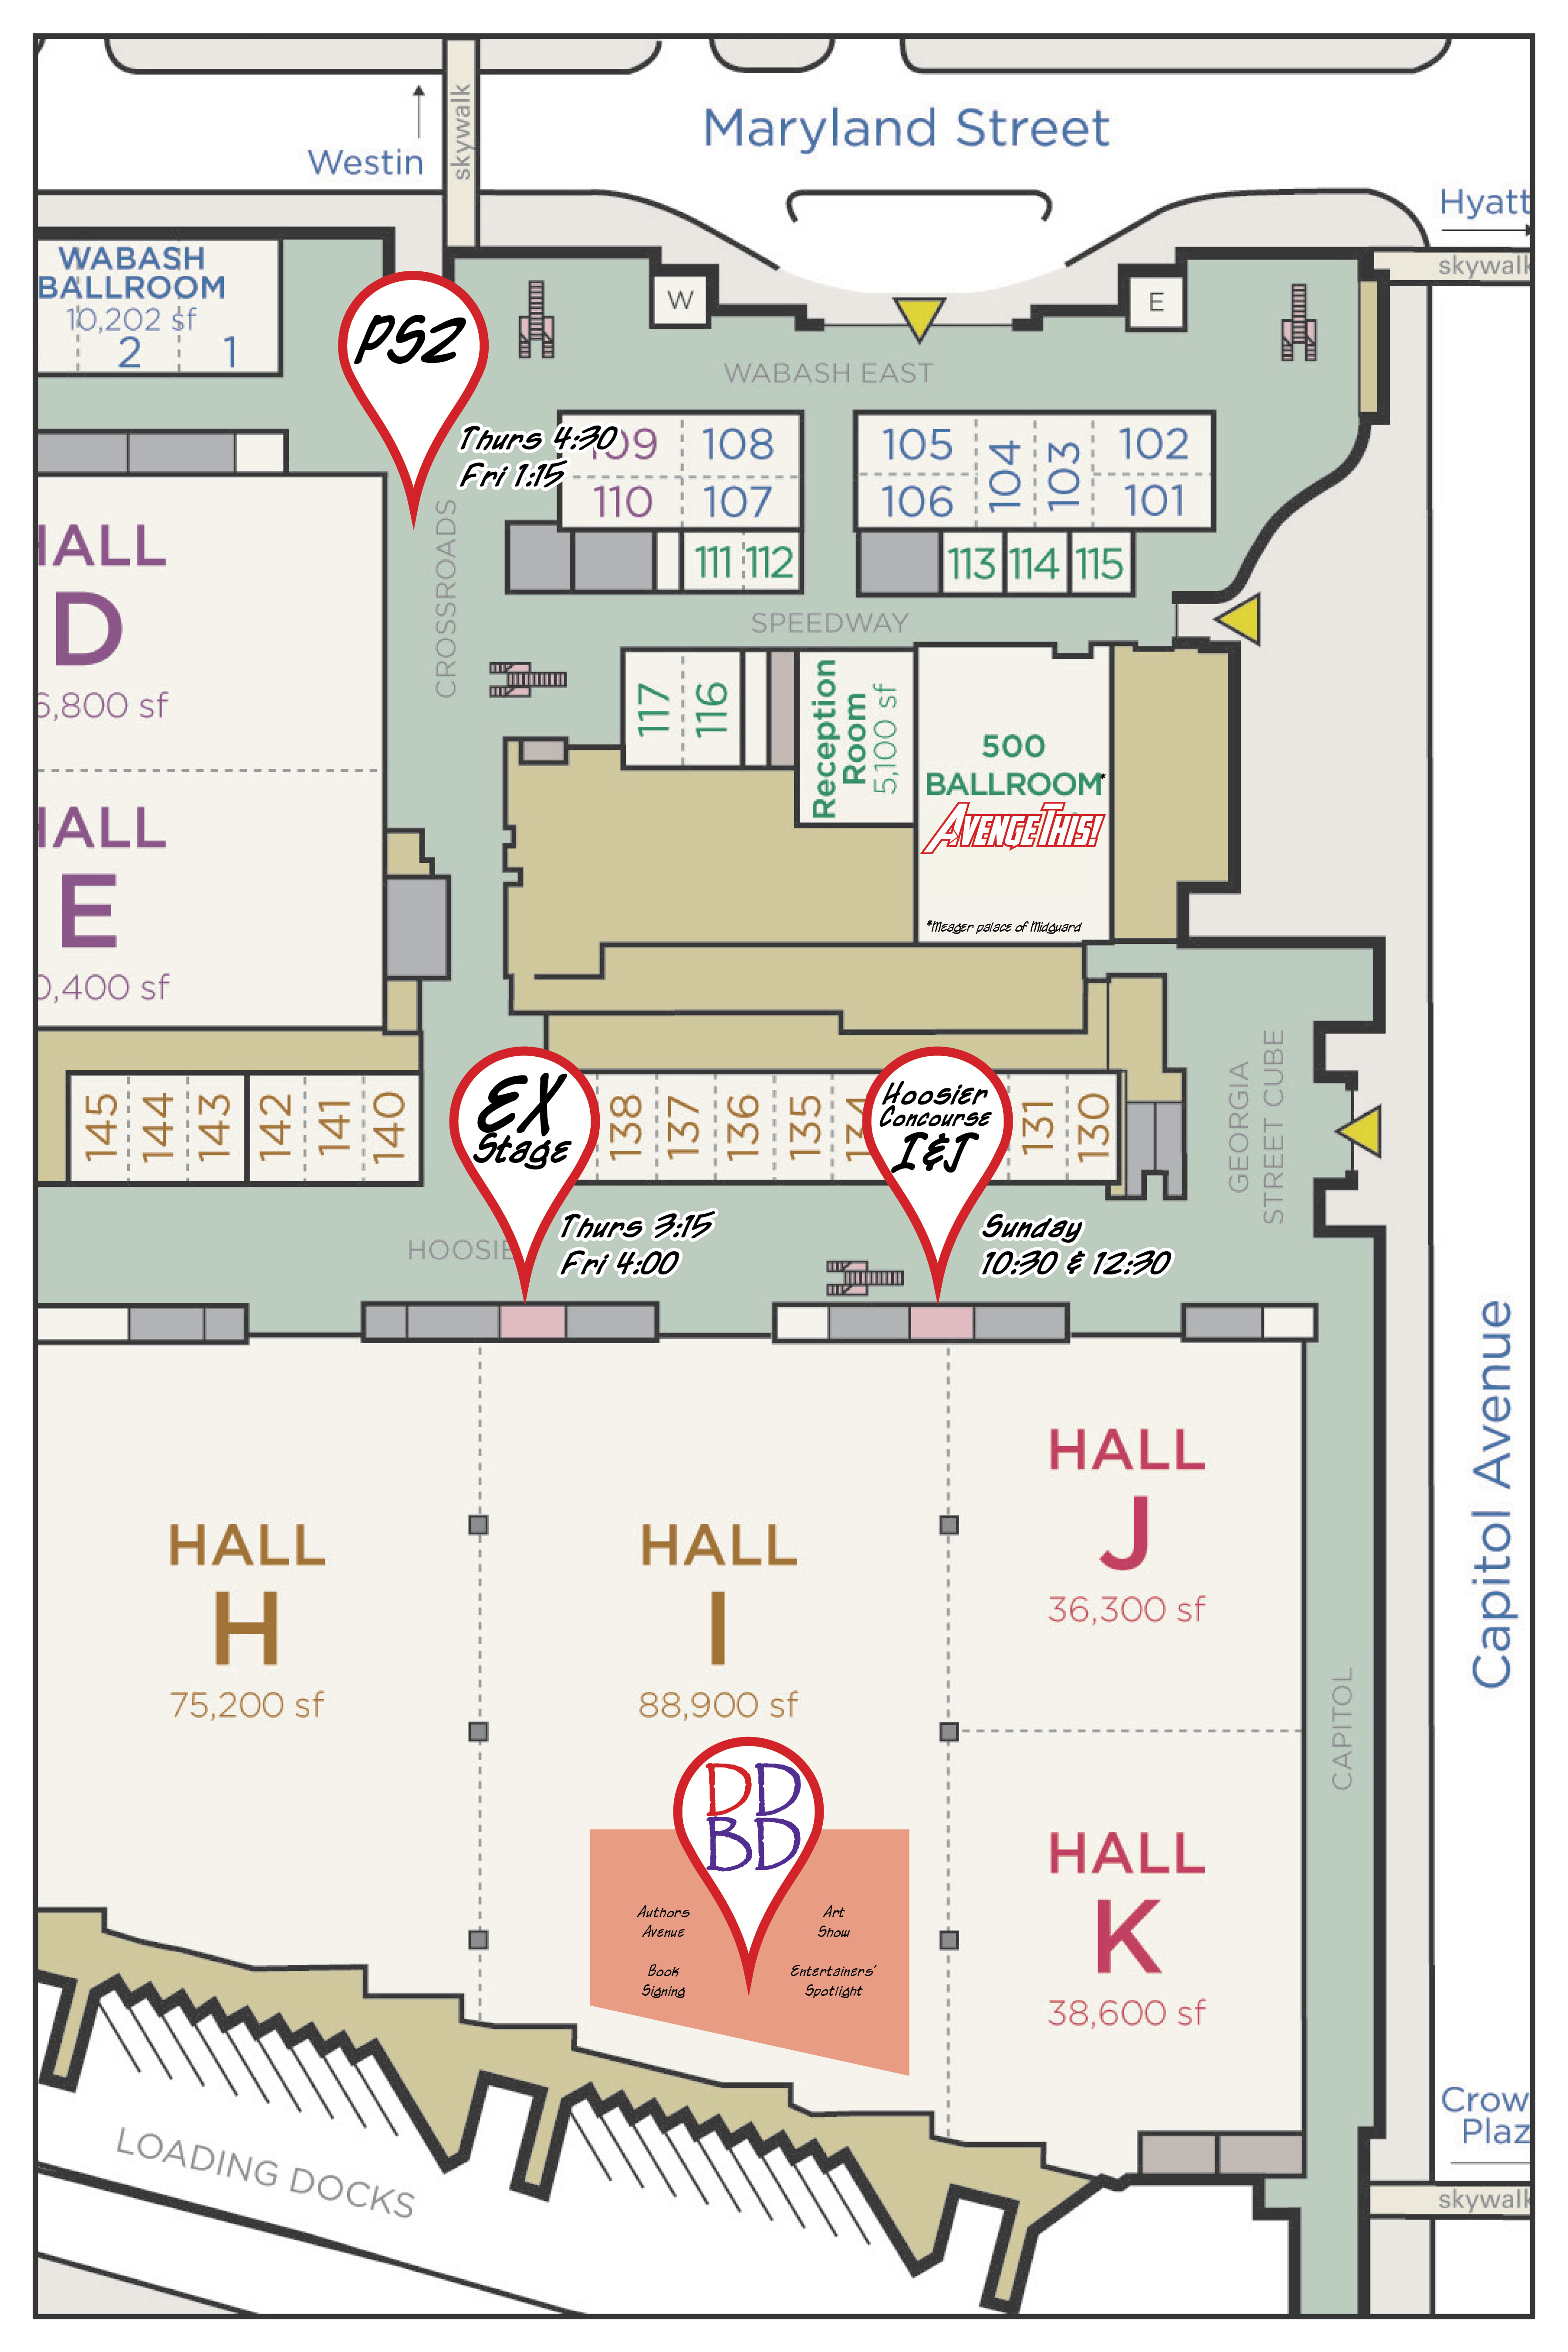 Map showing DDBD locations throughout Gen Con 2015